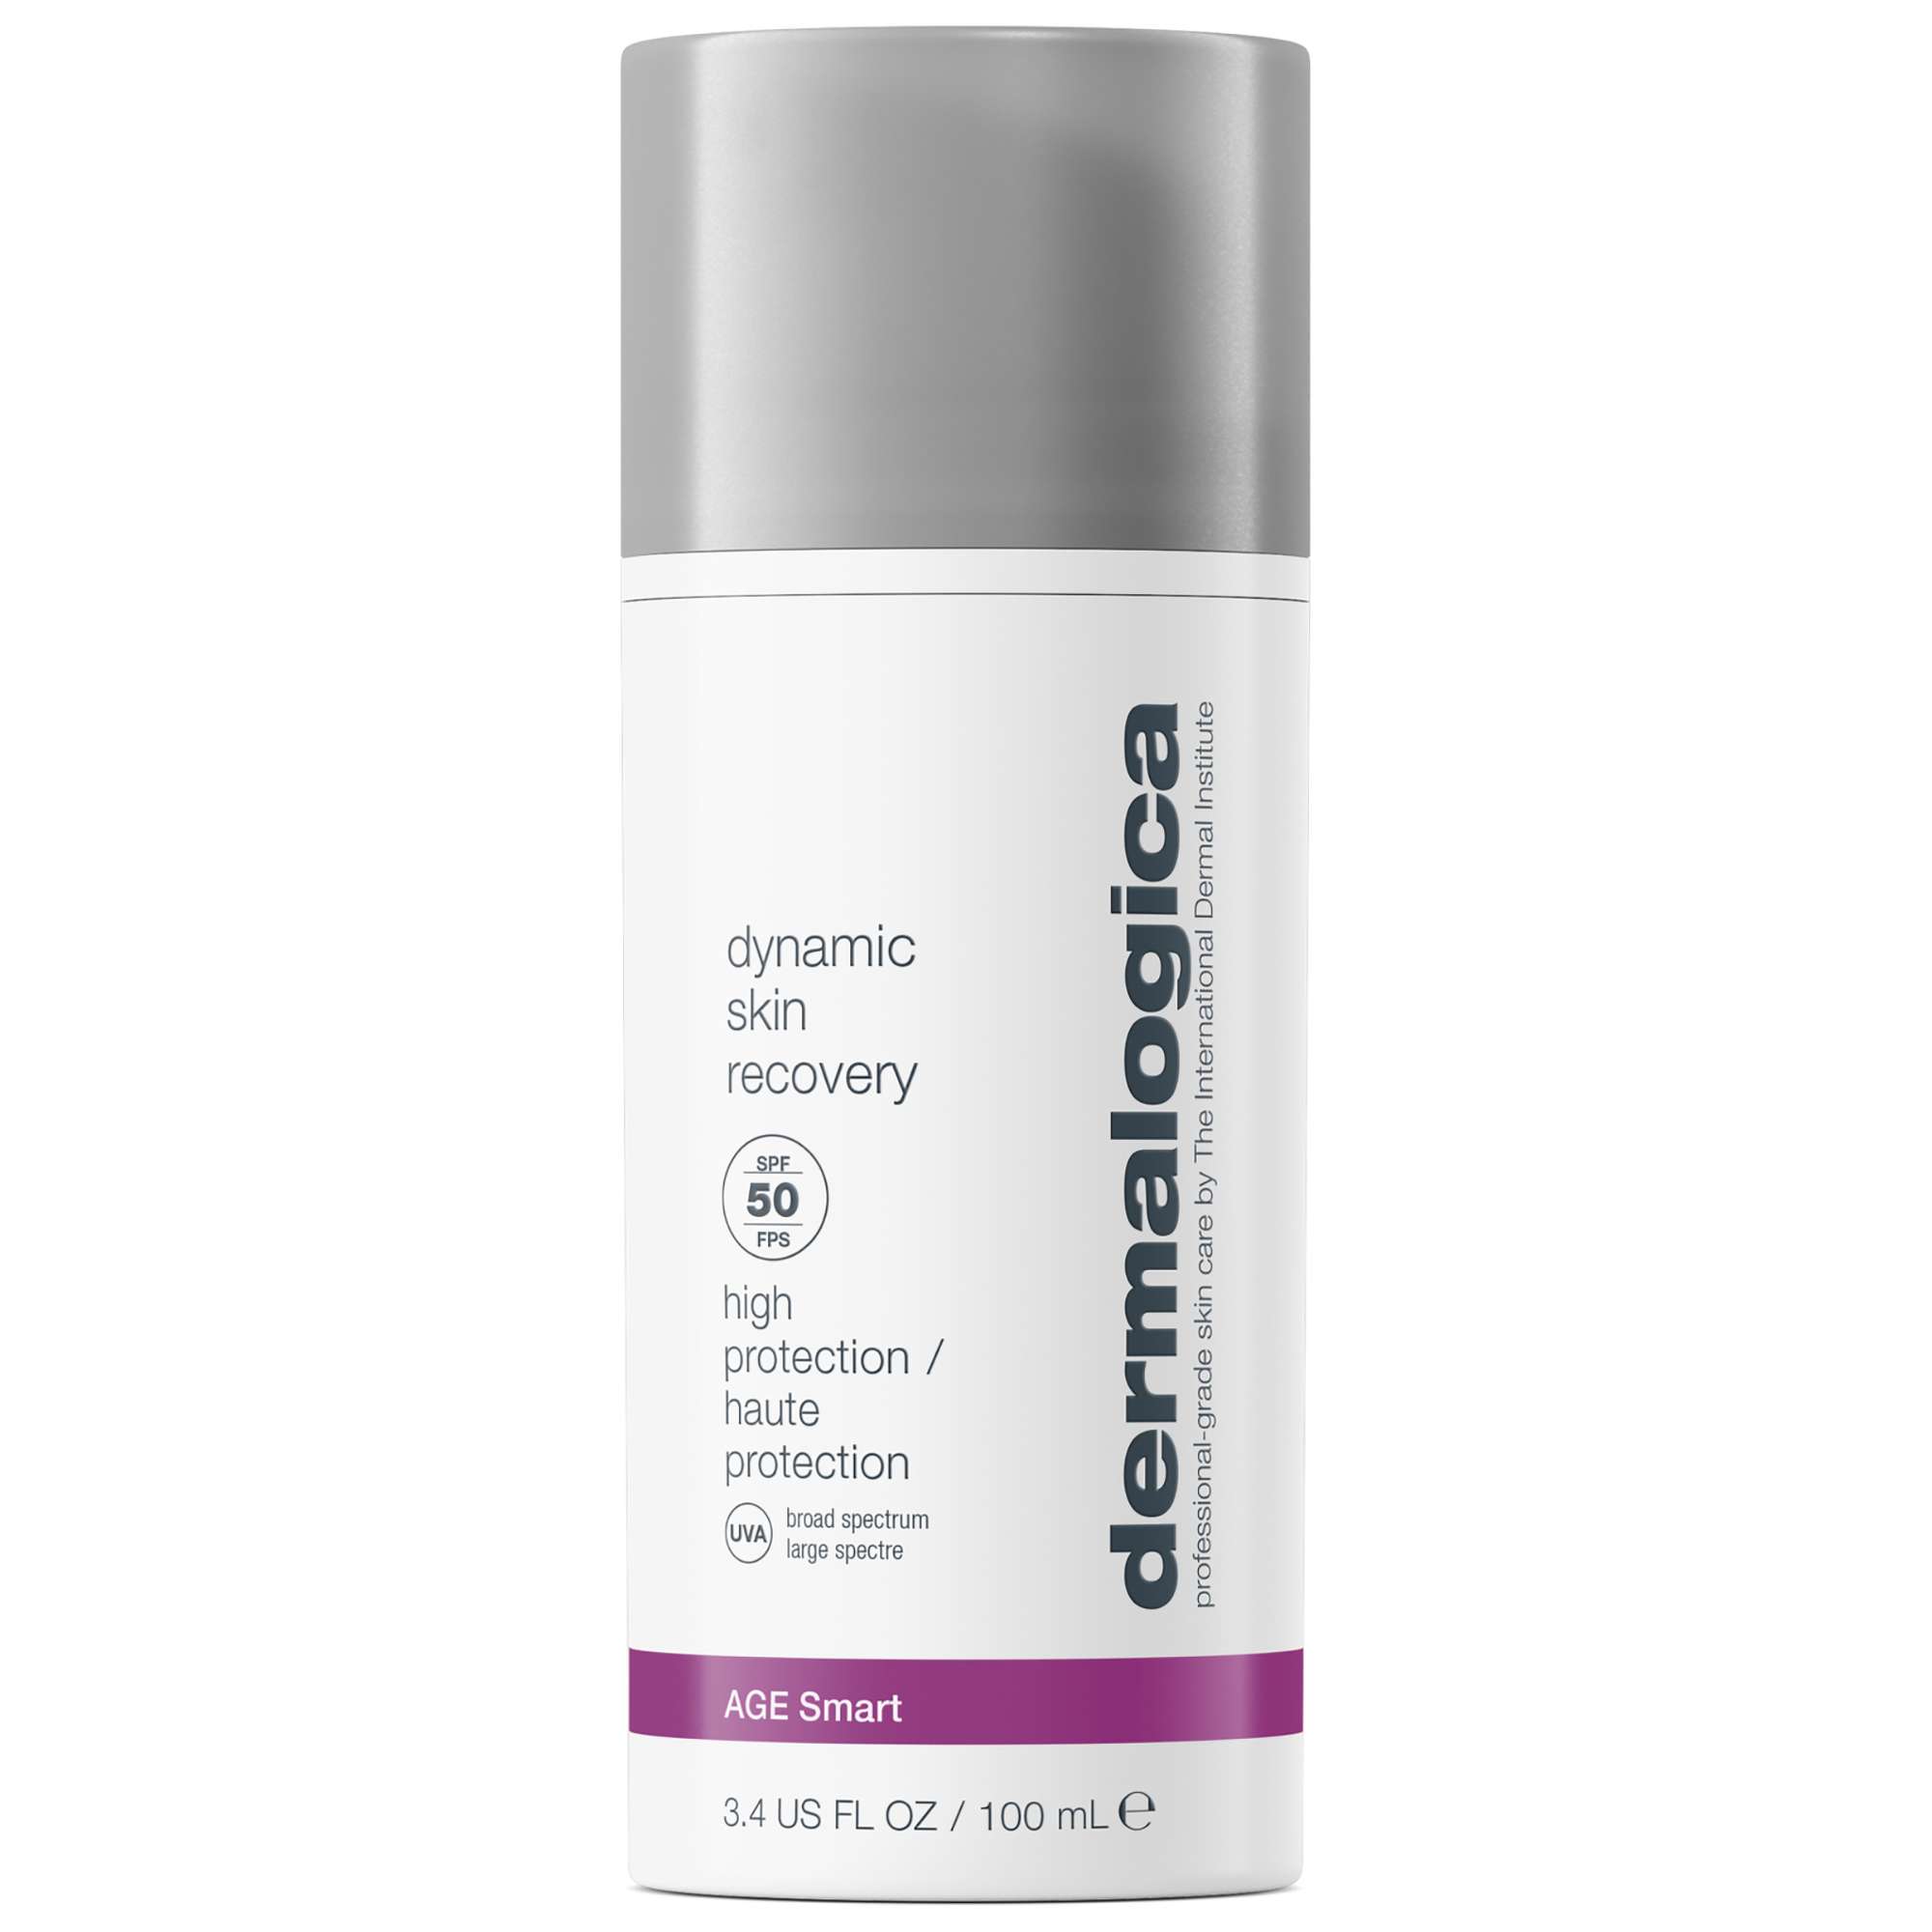 Image of Dermalogica Age Smart® Dynamic Skin Recovery SPF50 100ml